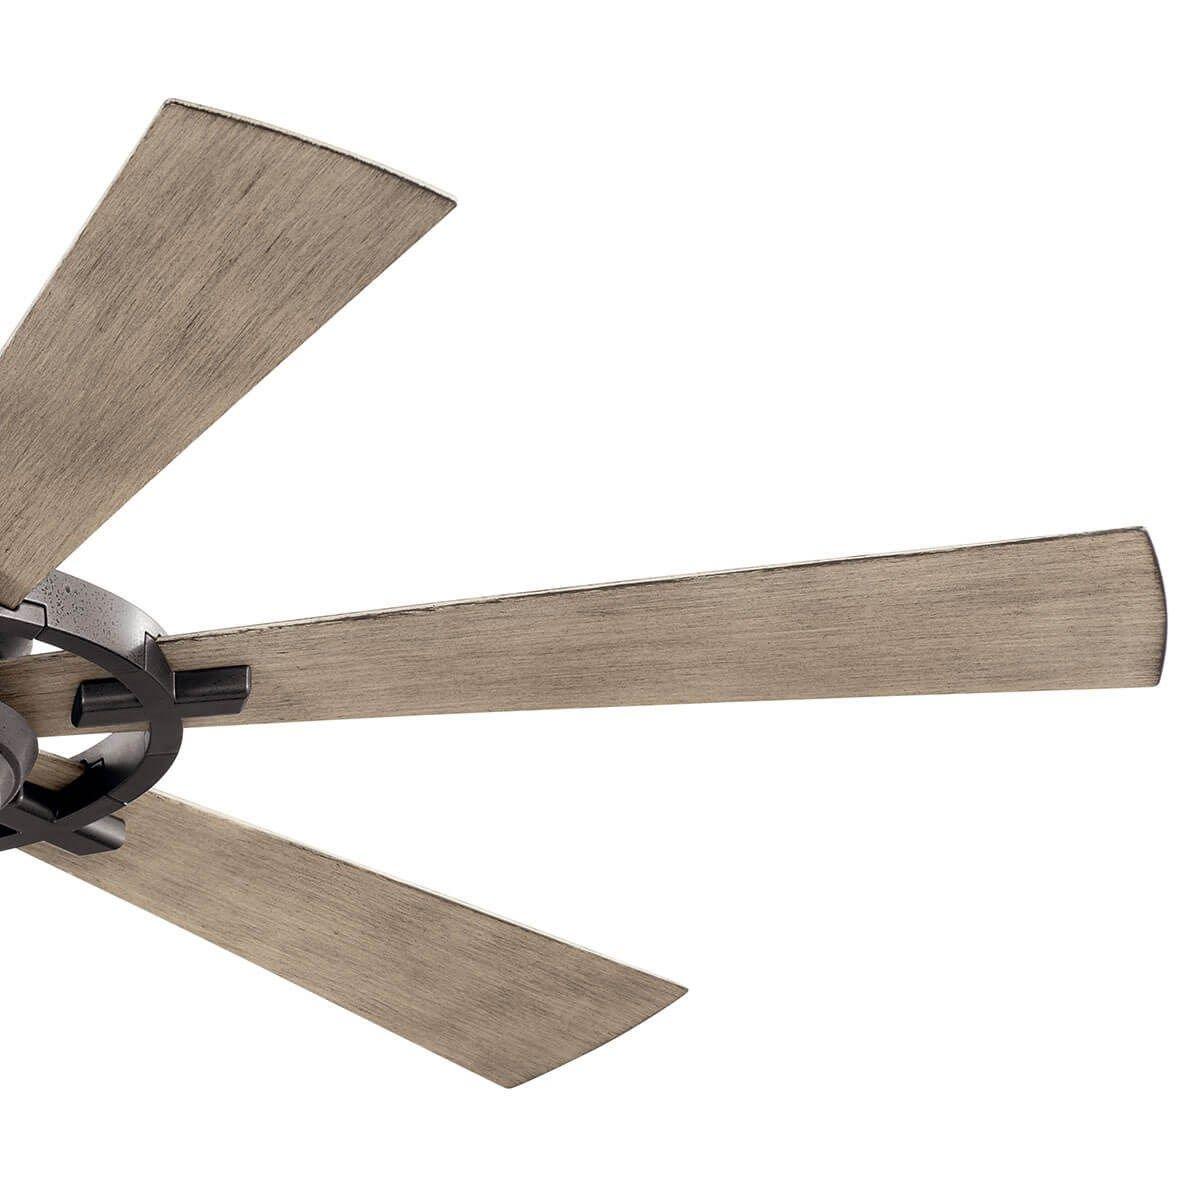 Iras 52 Inch Farmhouse Indoor/Outdoor Ceiling Fan With Light And Remote